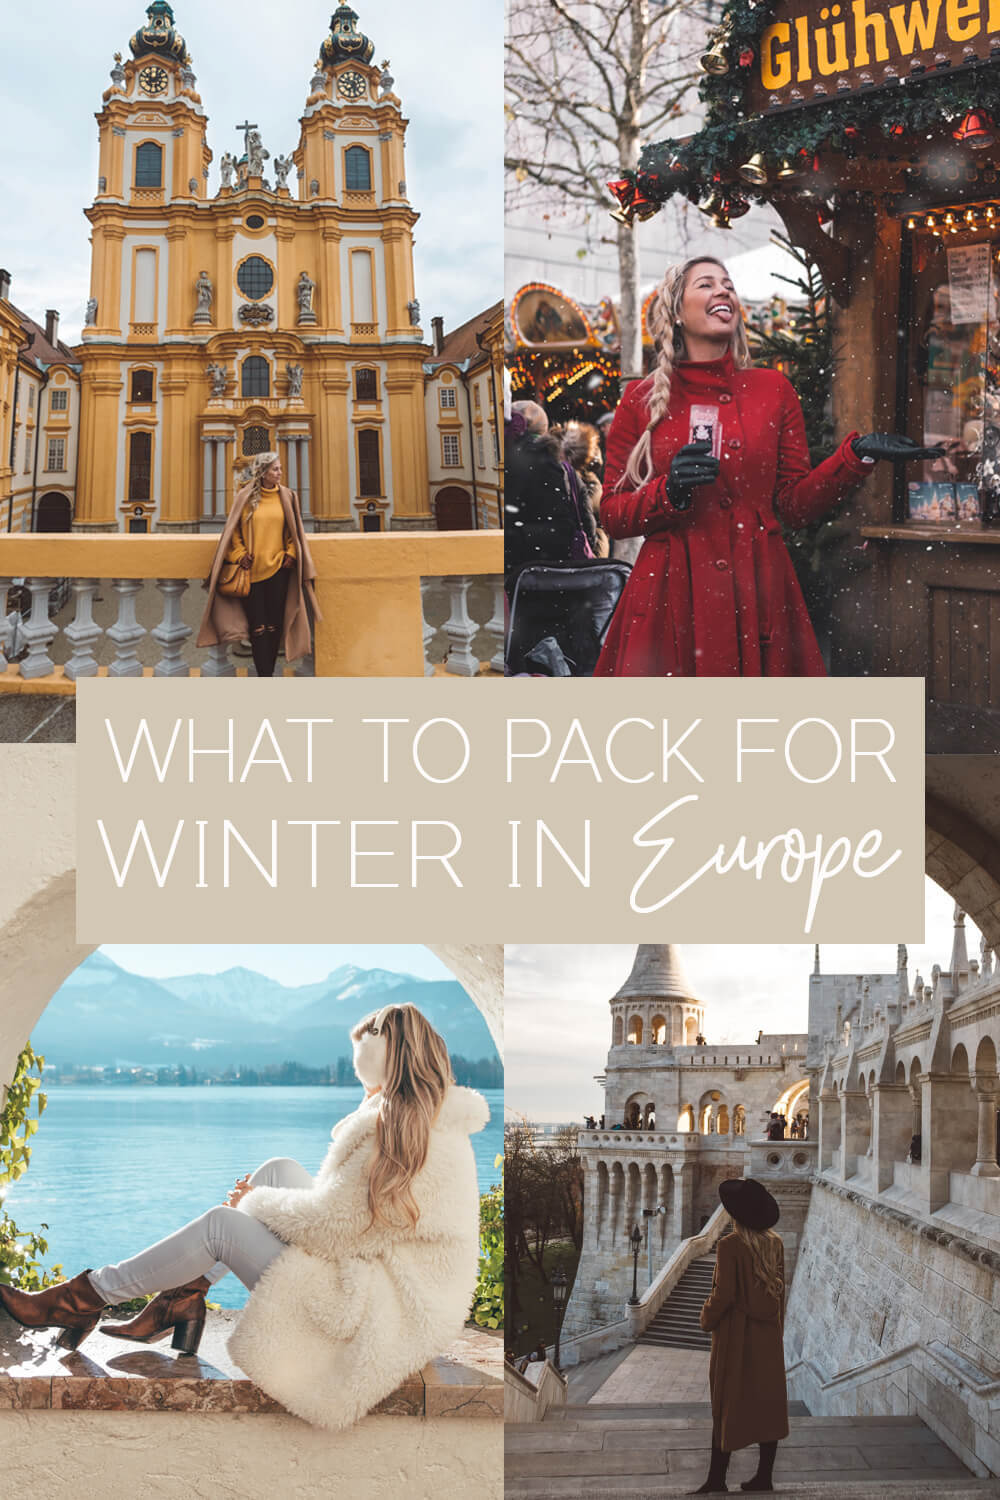 Outfits to Pack for Winter in Europe